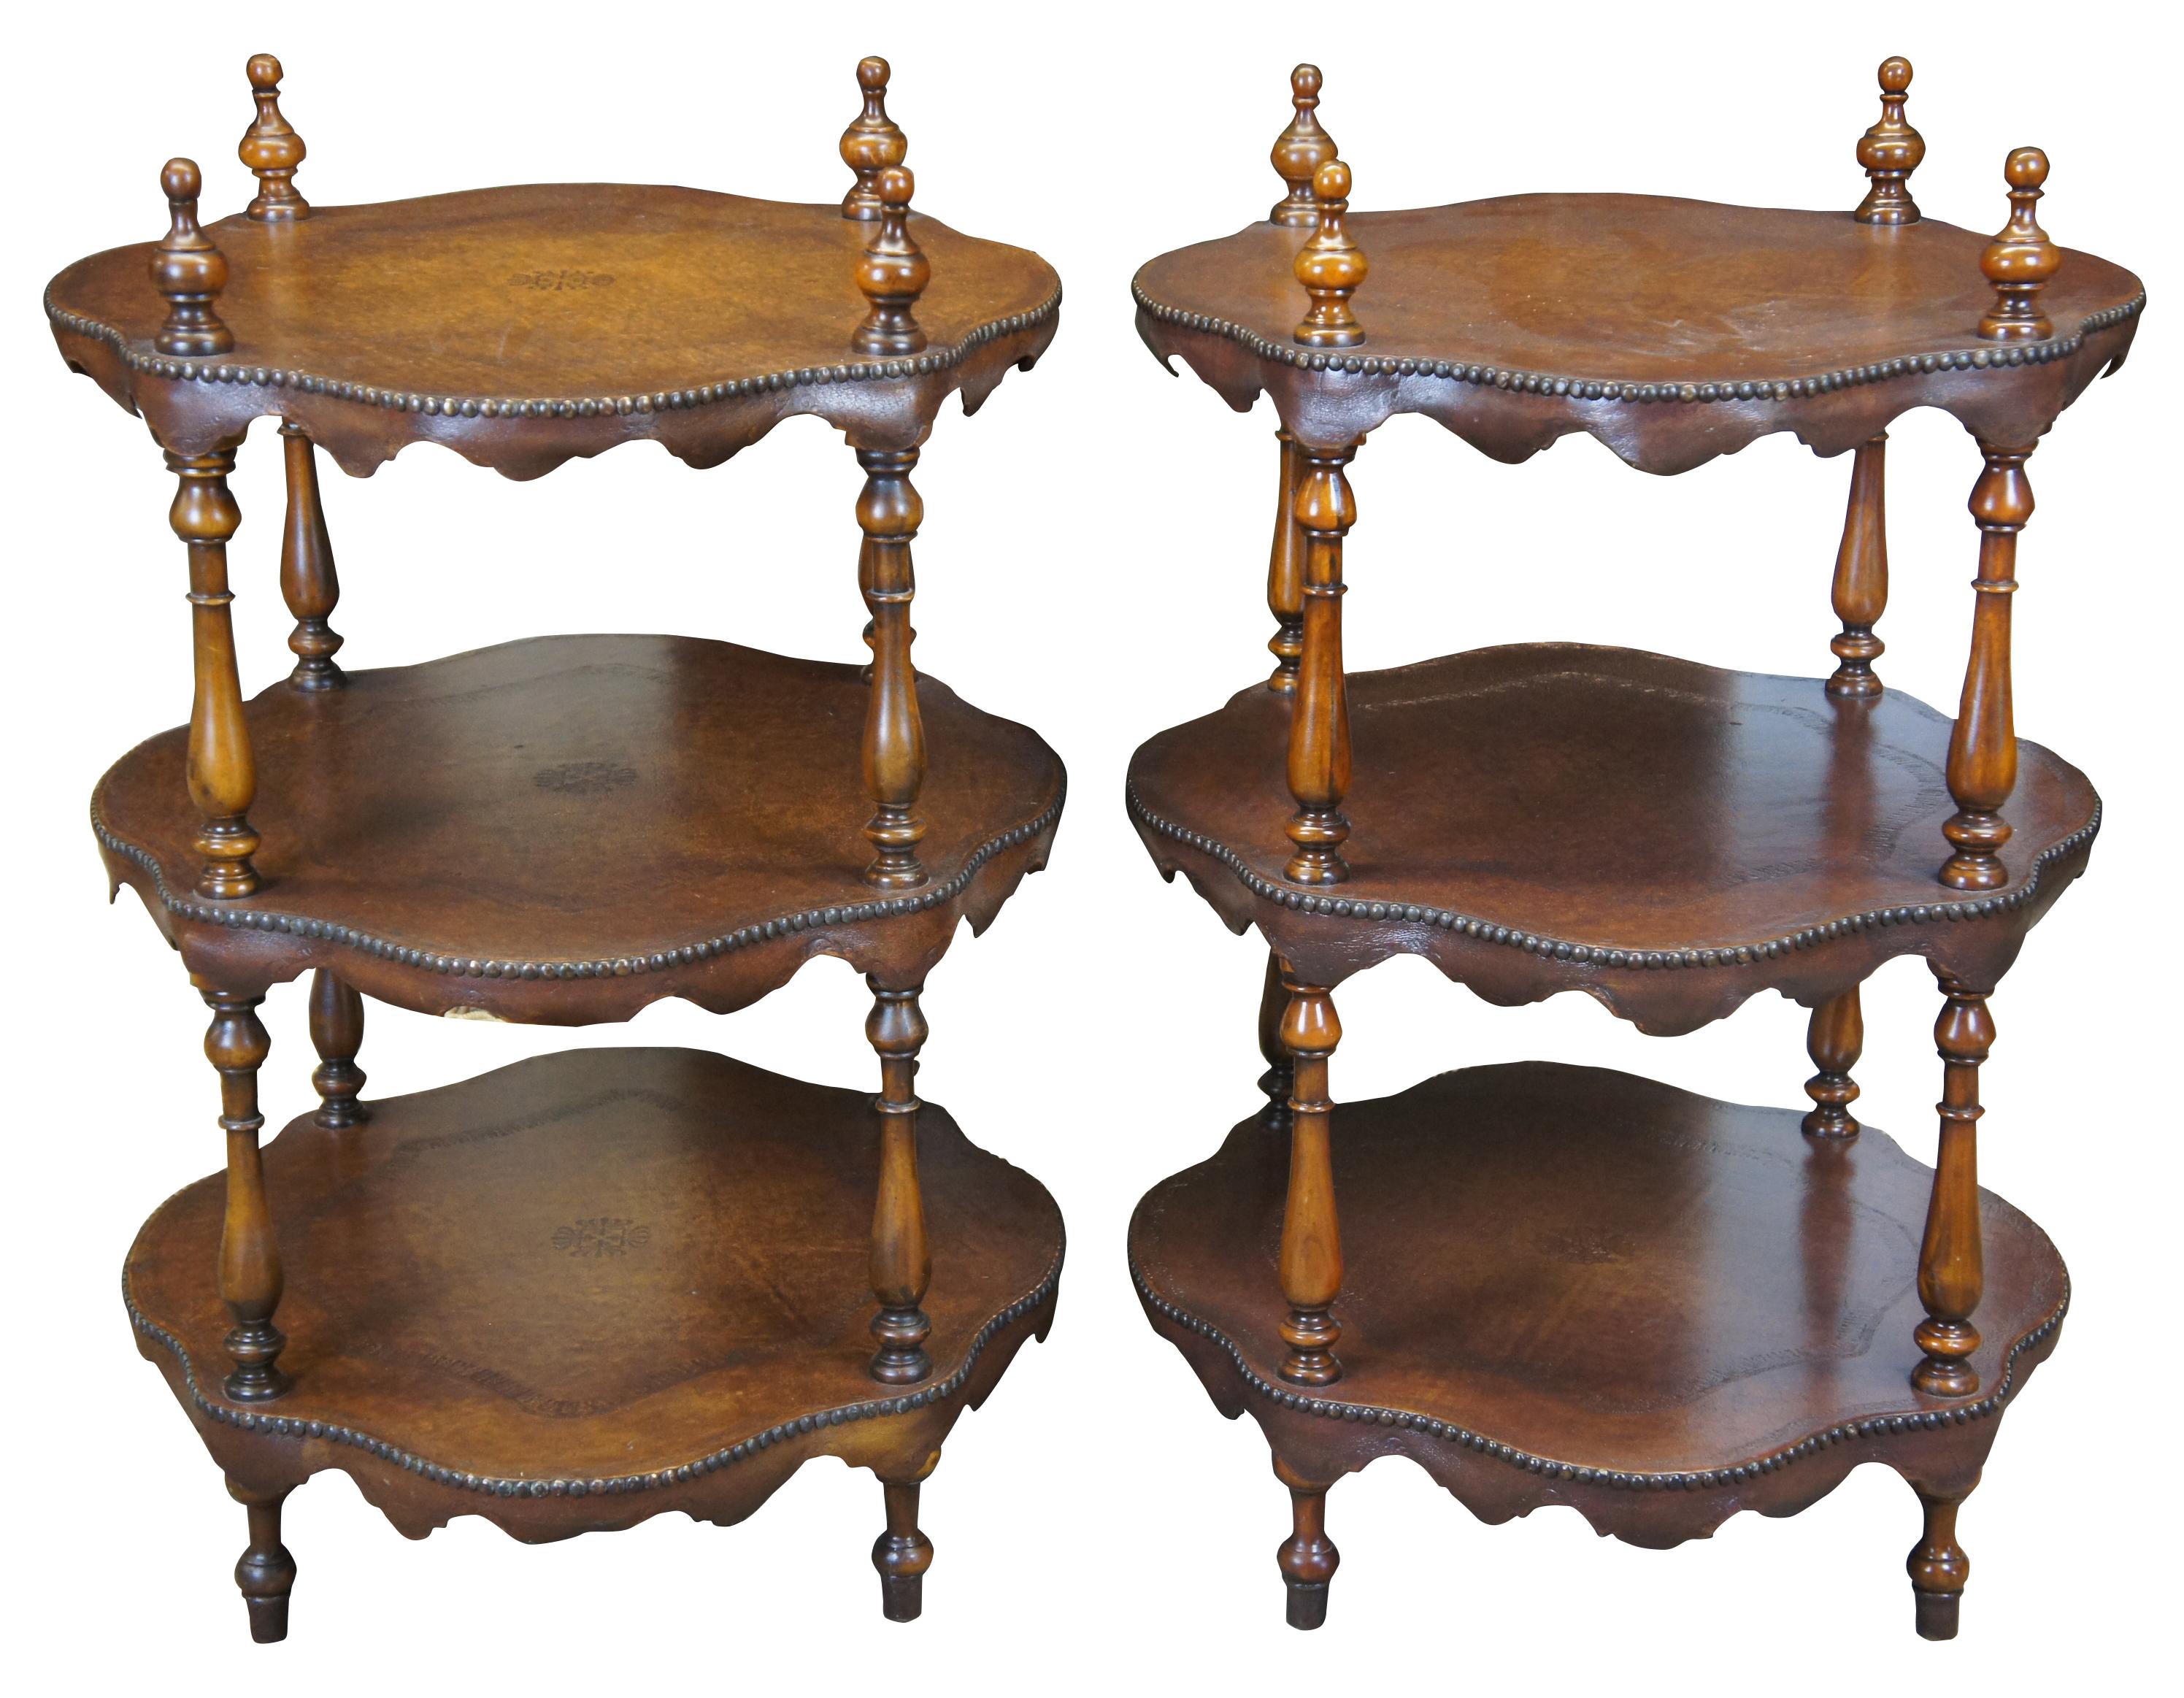 Theodore Alexander tiered leather tables, circa 1980s. Features three turtle top table surfaces, supported by turned ballisters. Includes tooled leather and nailhead trim. 5033-003, handmade in Vietnam.
   
Surface Height - 29.75